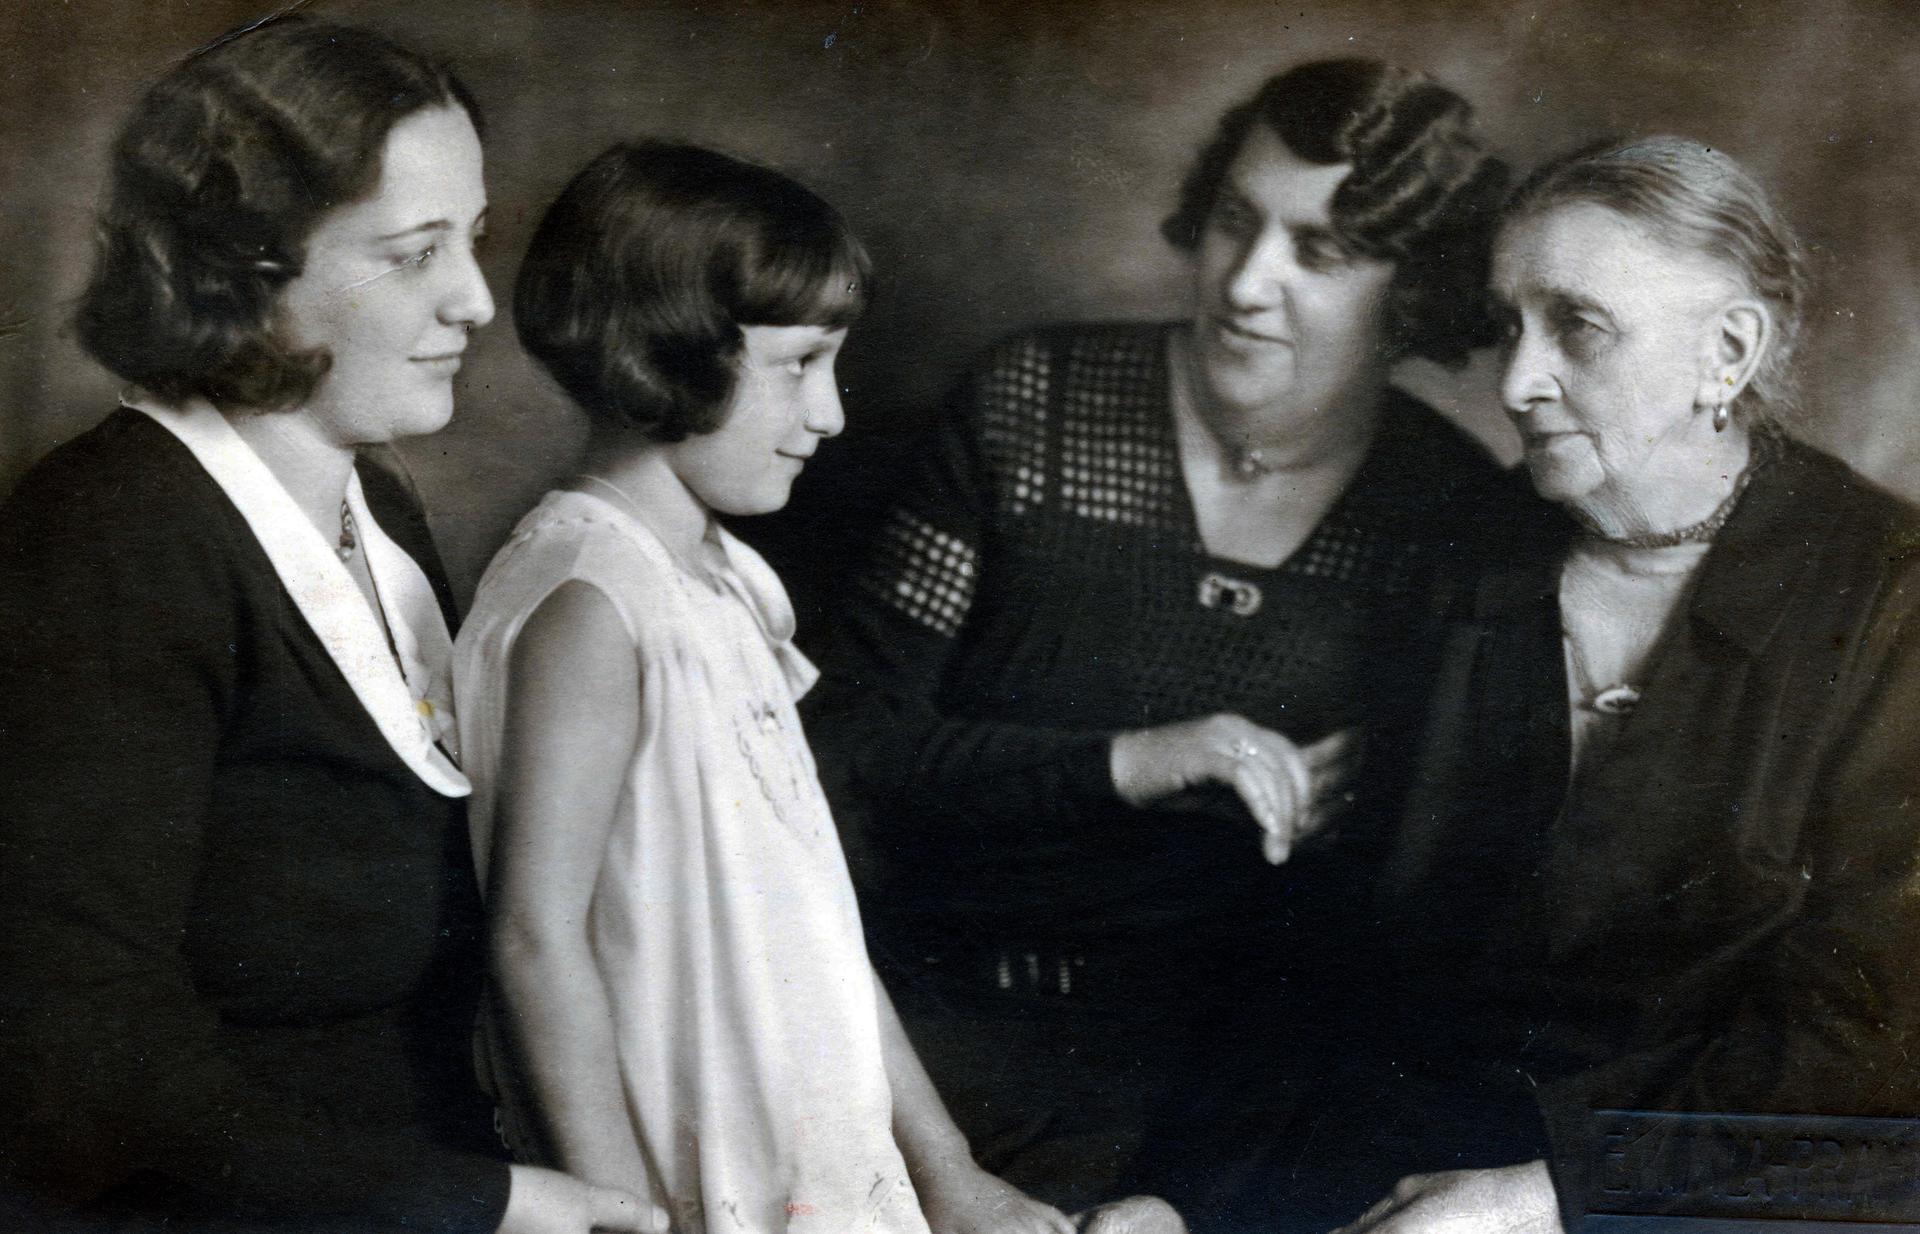 Hana, as a young girl in Prague, is surrounded by her mother, grandmother and great grandmother